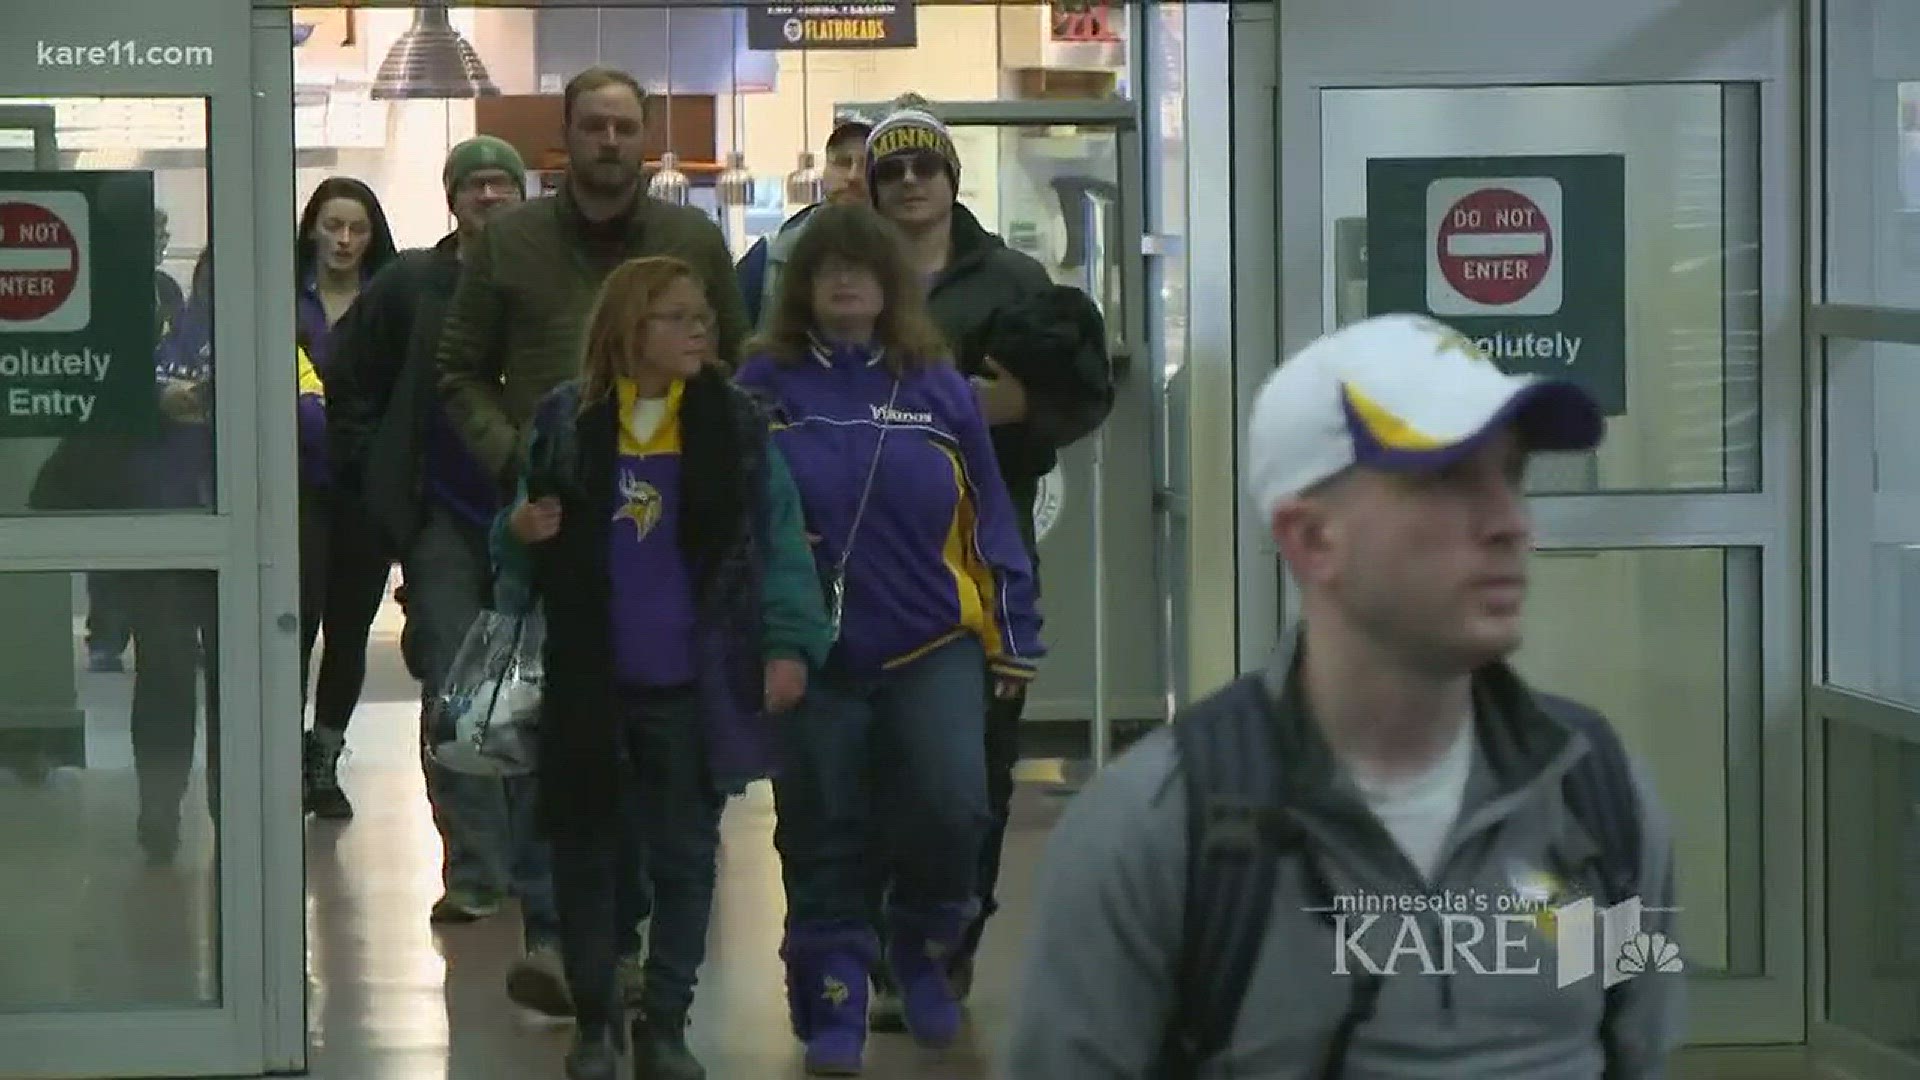 The sadness continued Monday morning as Vikings fans returned early to MSP International Airport from Philadelphia.